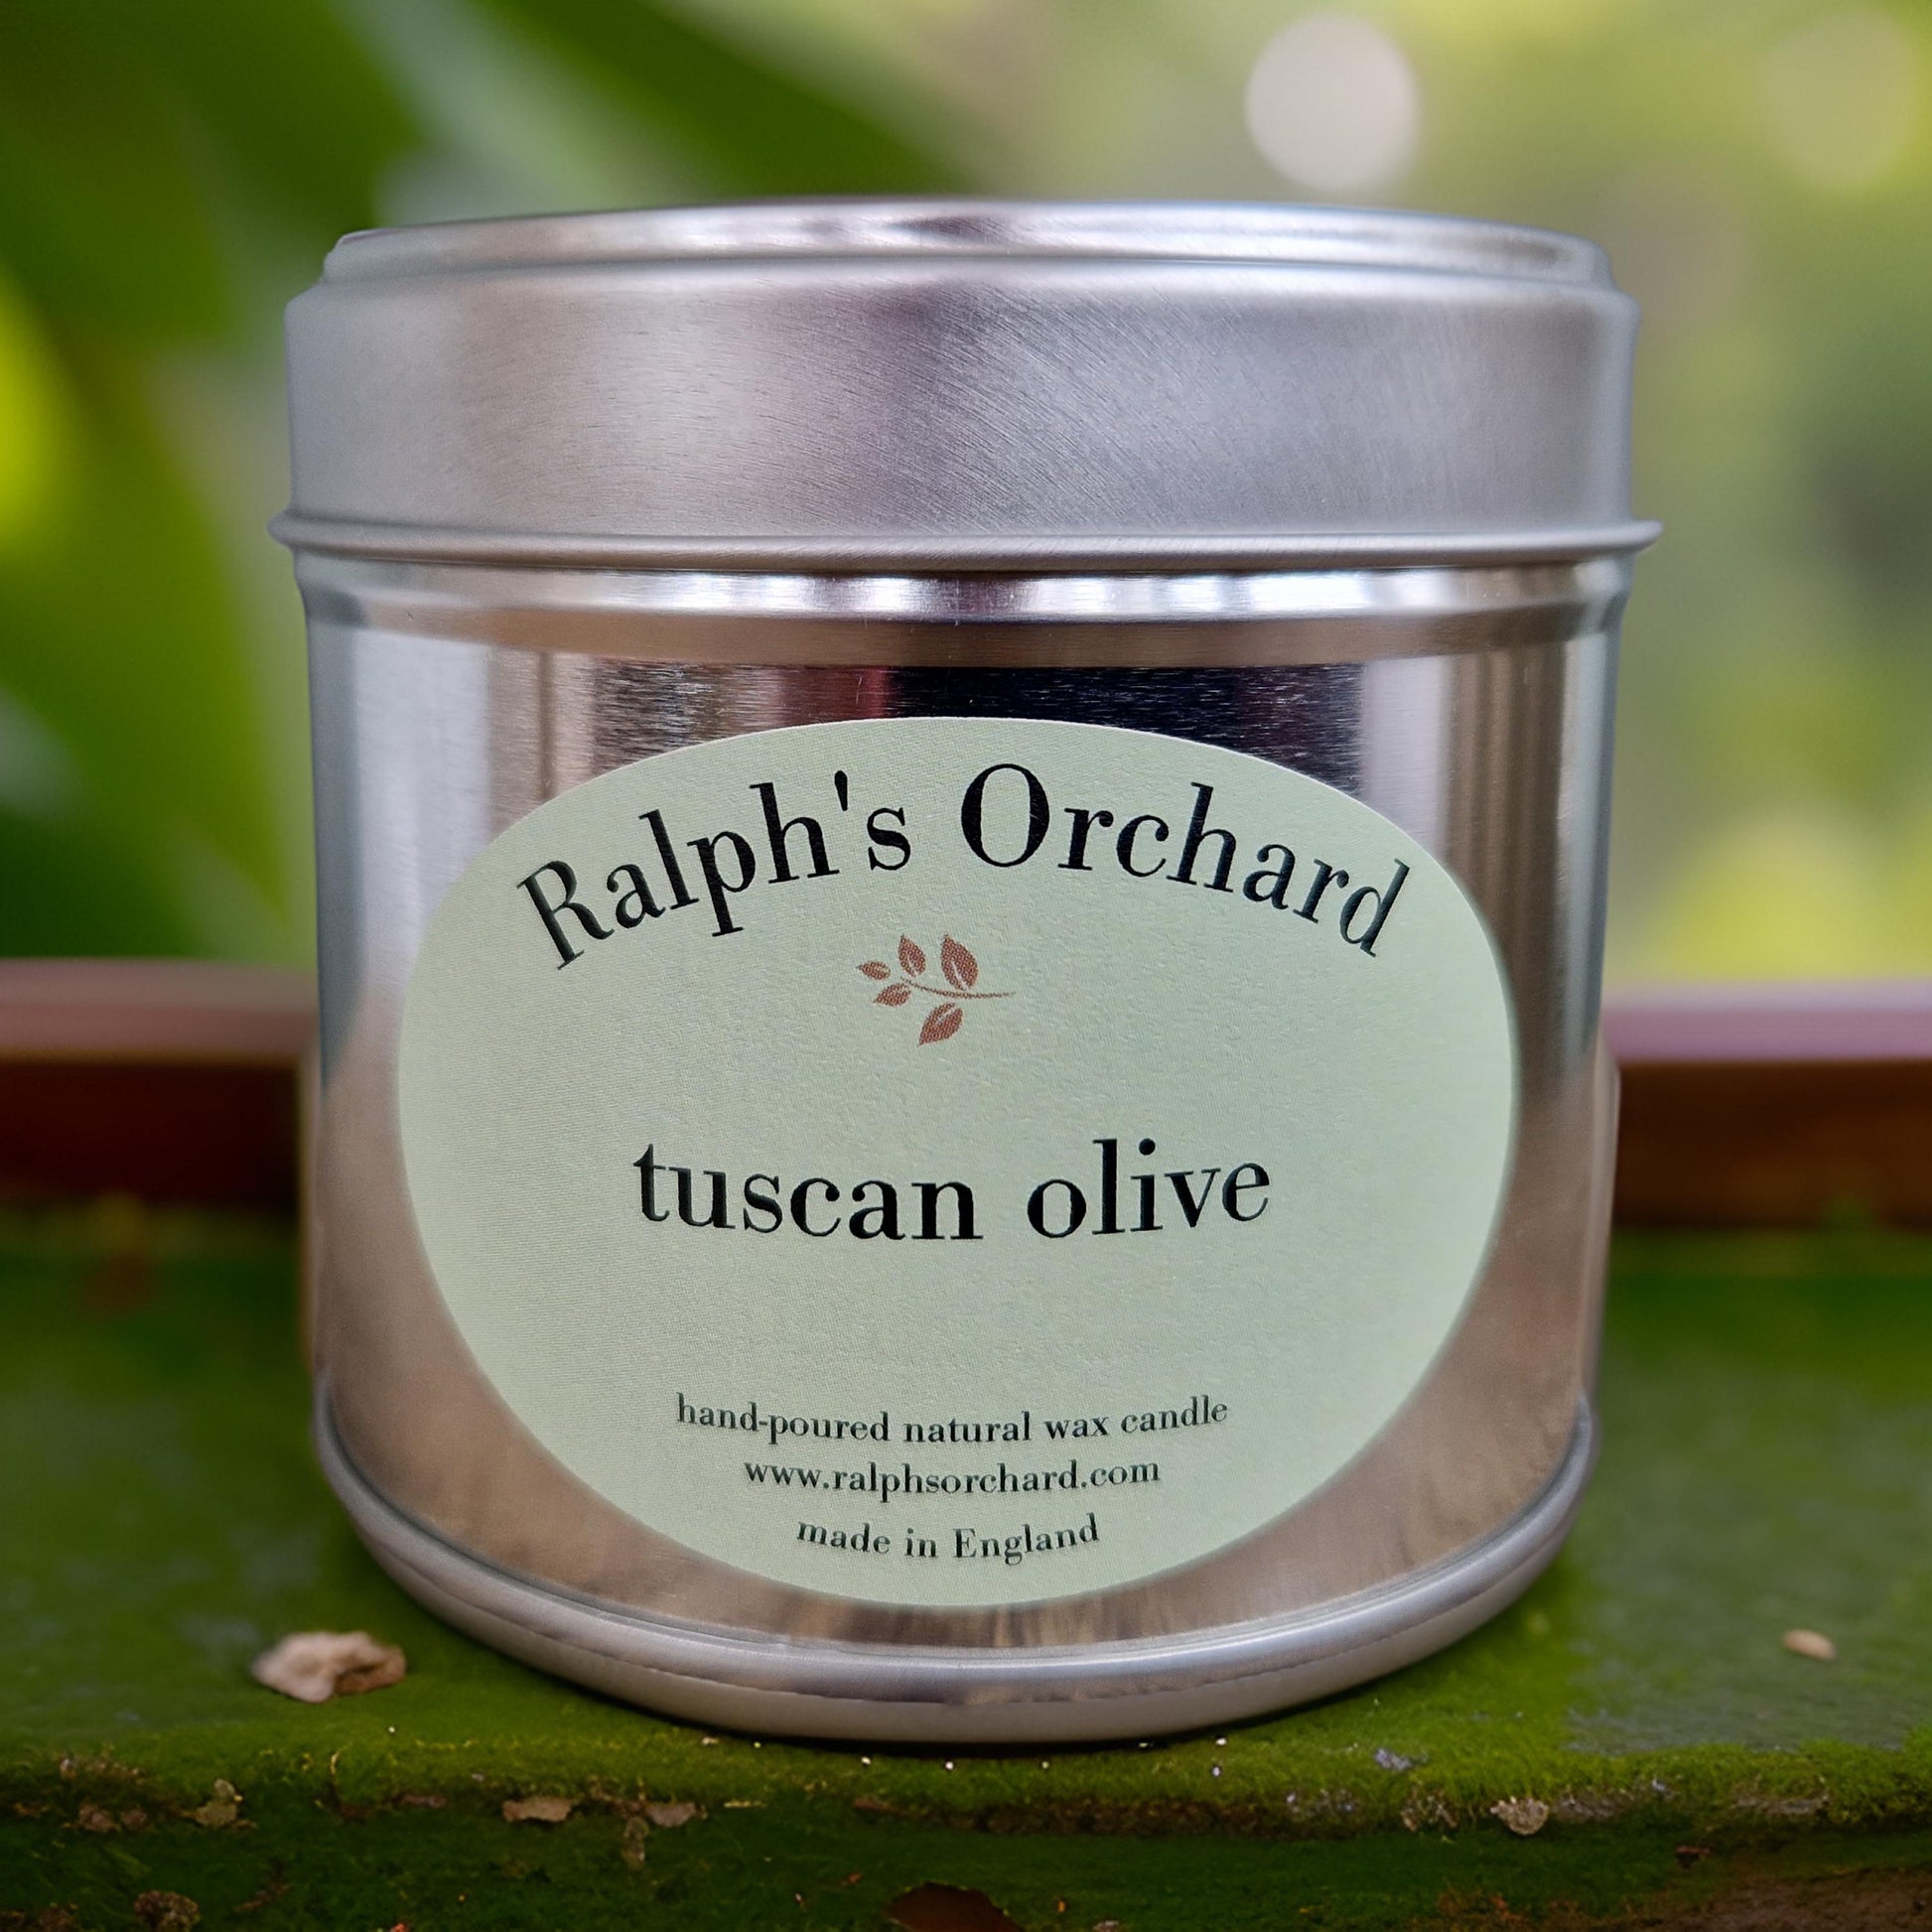 Tuscan olive scented candle